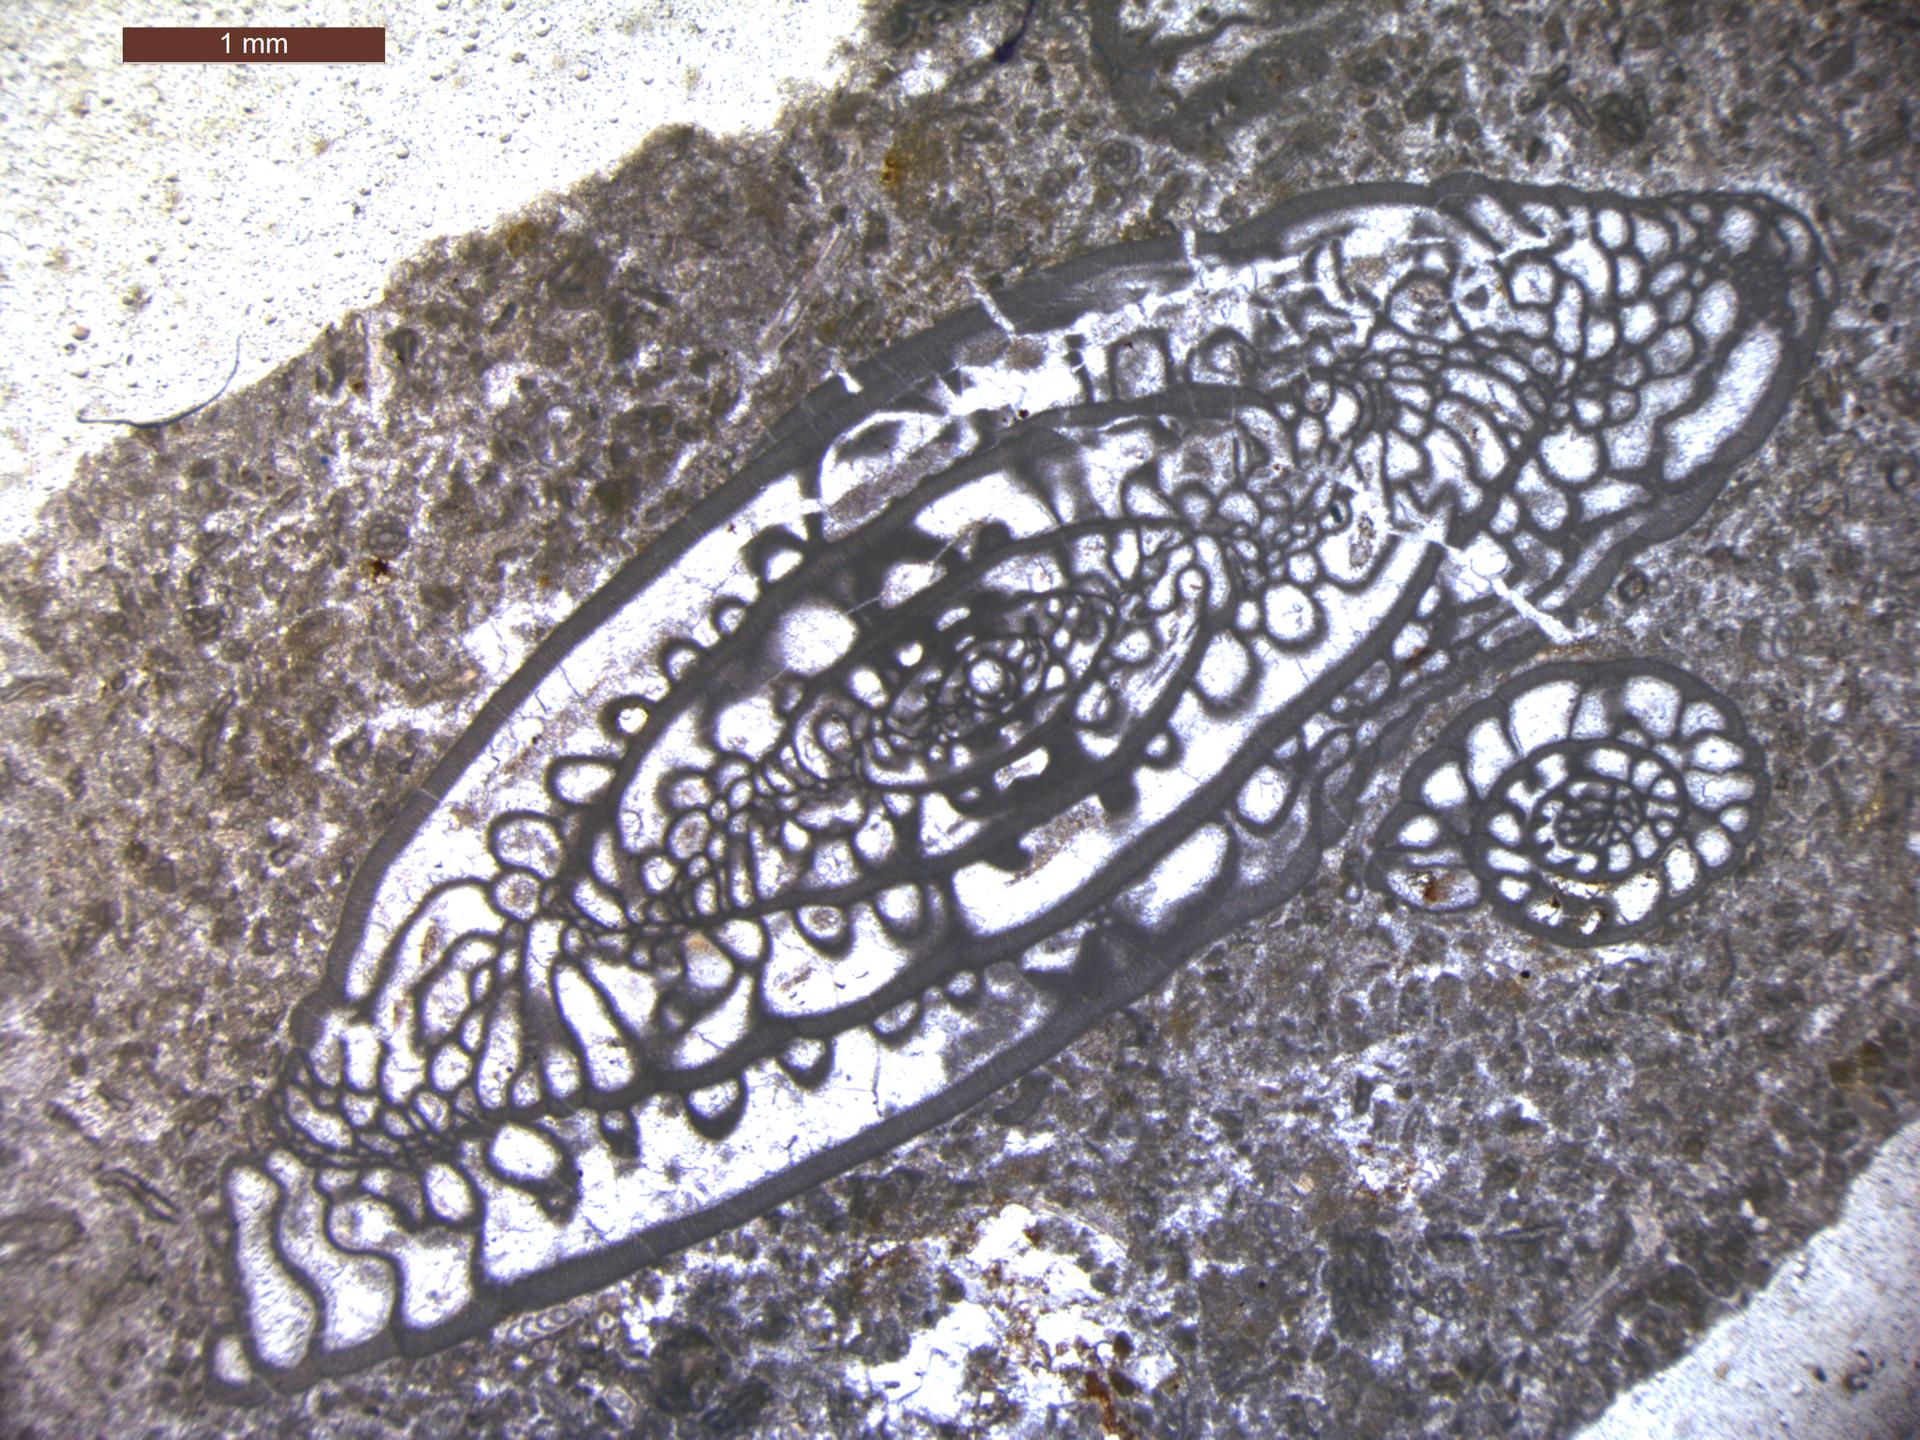 Photograph showing forams in thin section as viewed under a microscope. One of the forams has a spiral shell, the other is larger and elliptical. The scale bar on the photo is one millimeter.